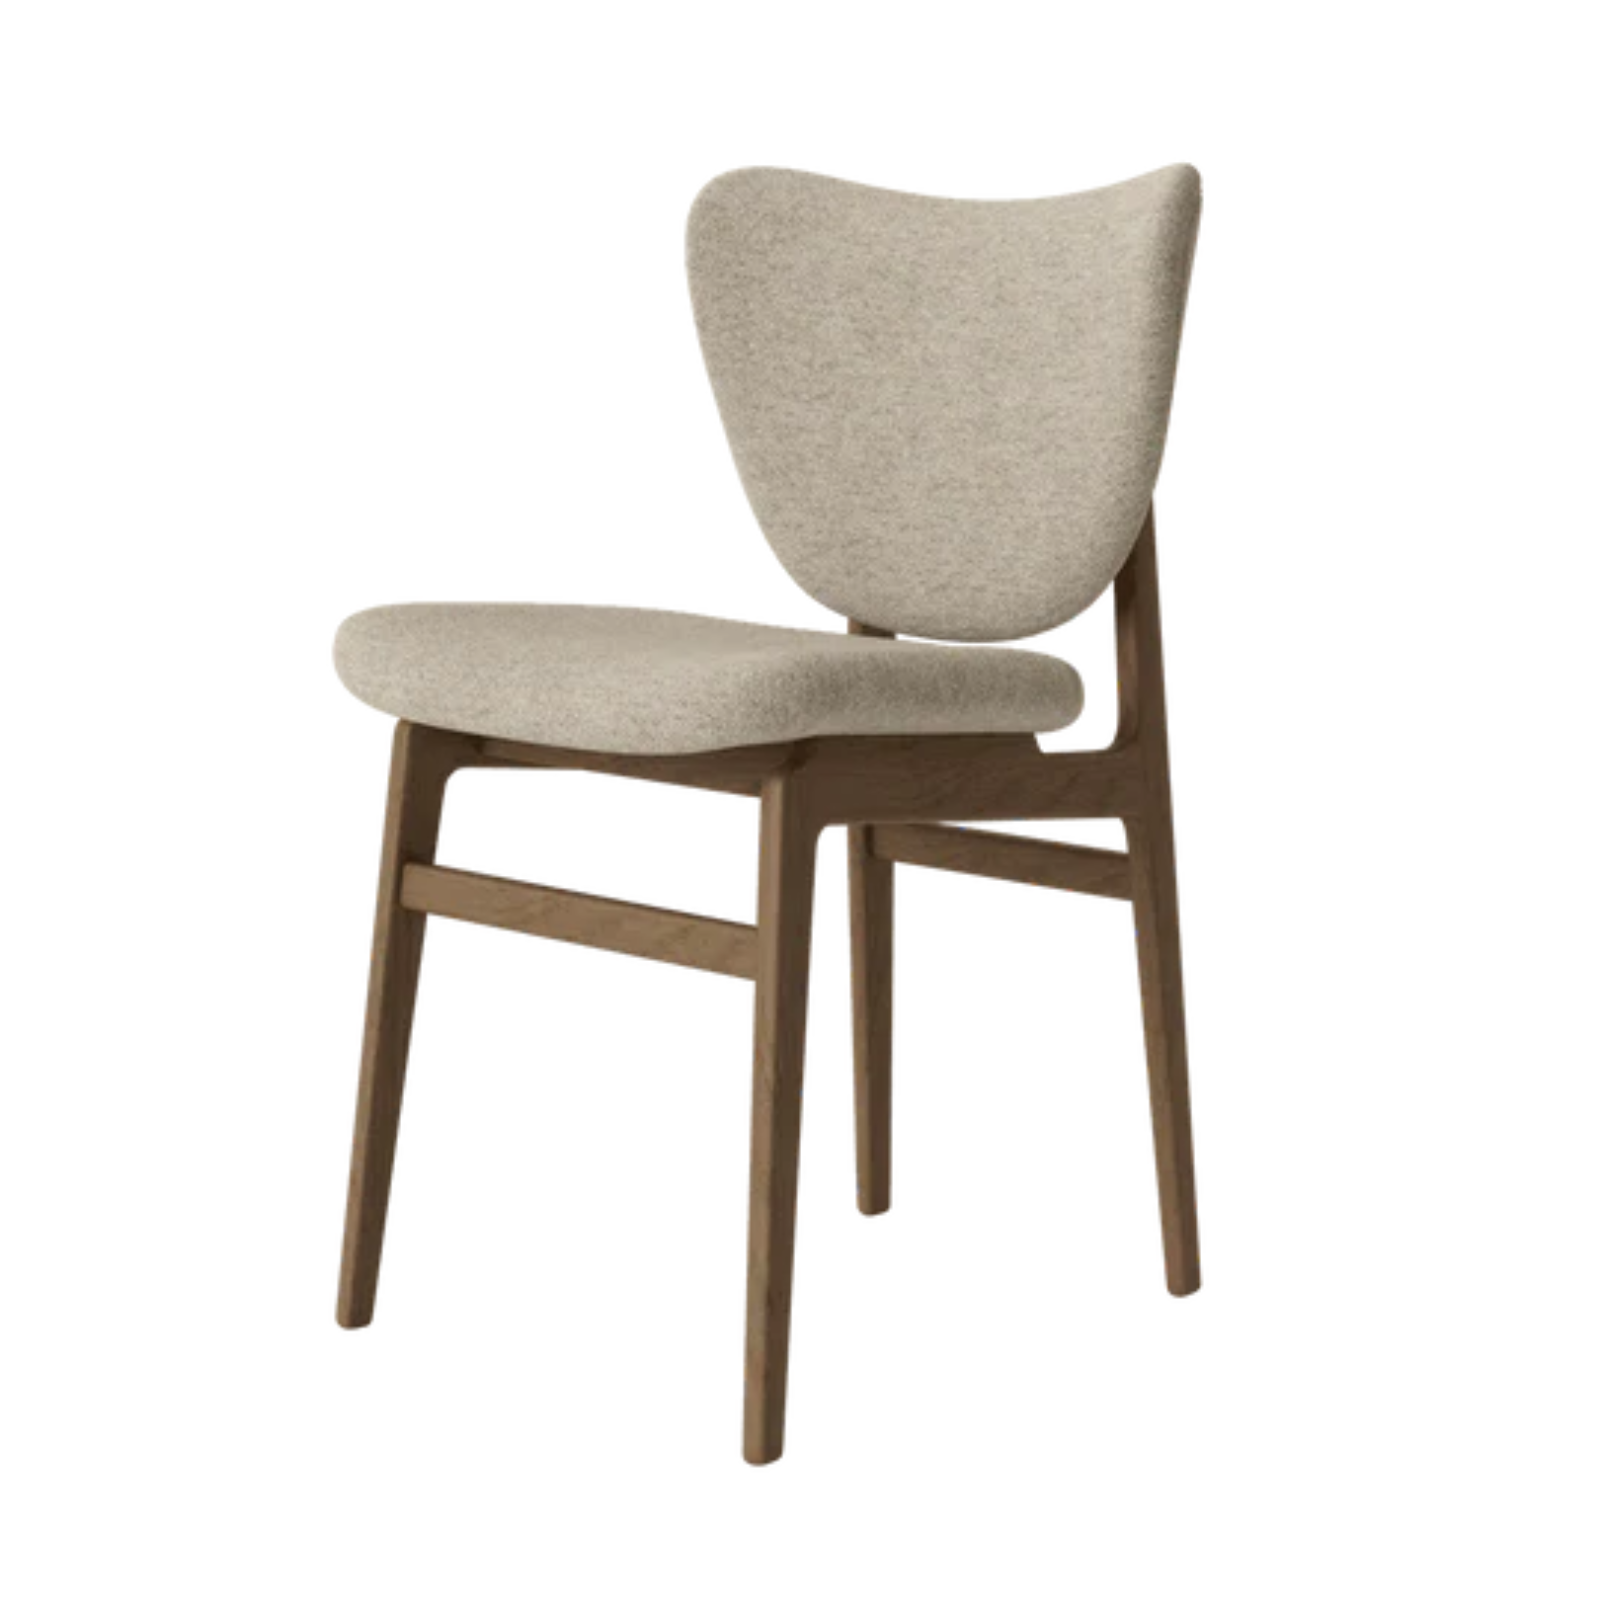 NORR11 Elephant Dining Chair fully upholstered seat and back both sides Barnum3 Oak Light Smoked